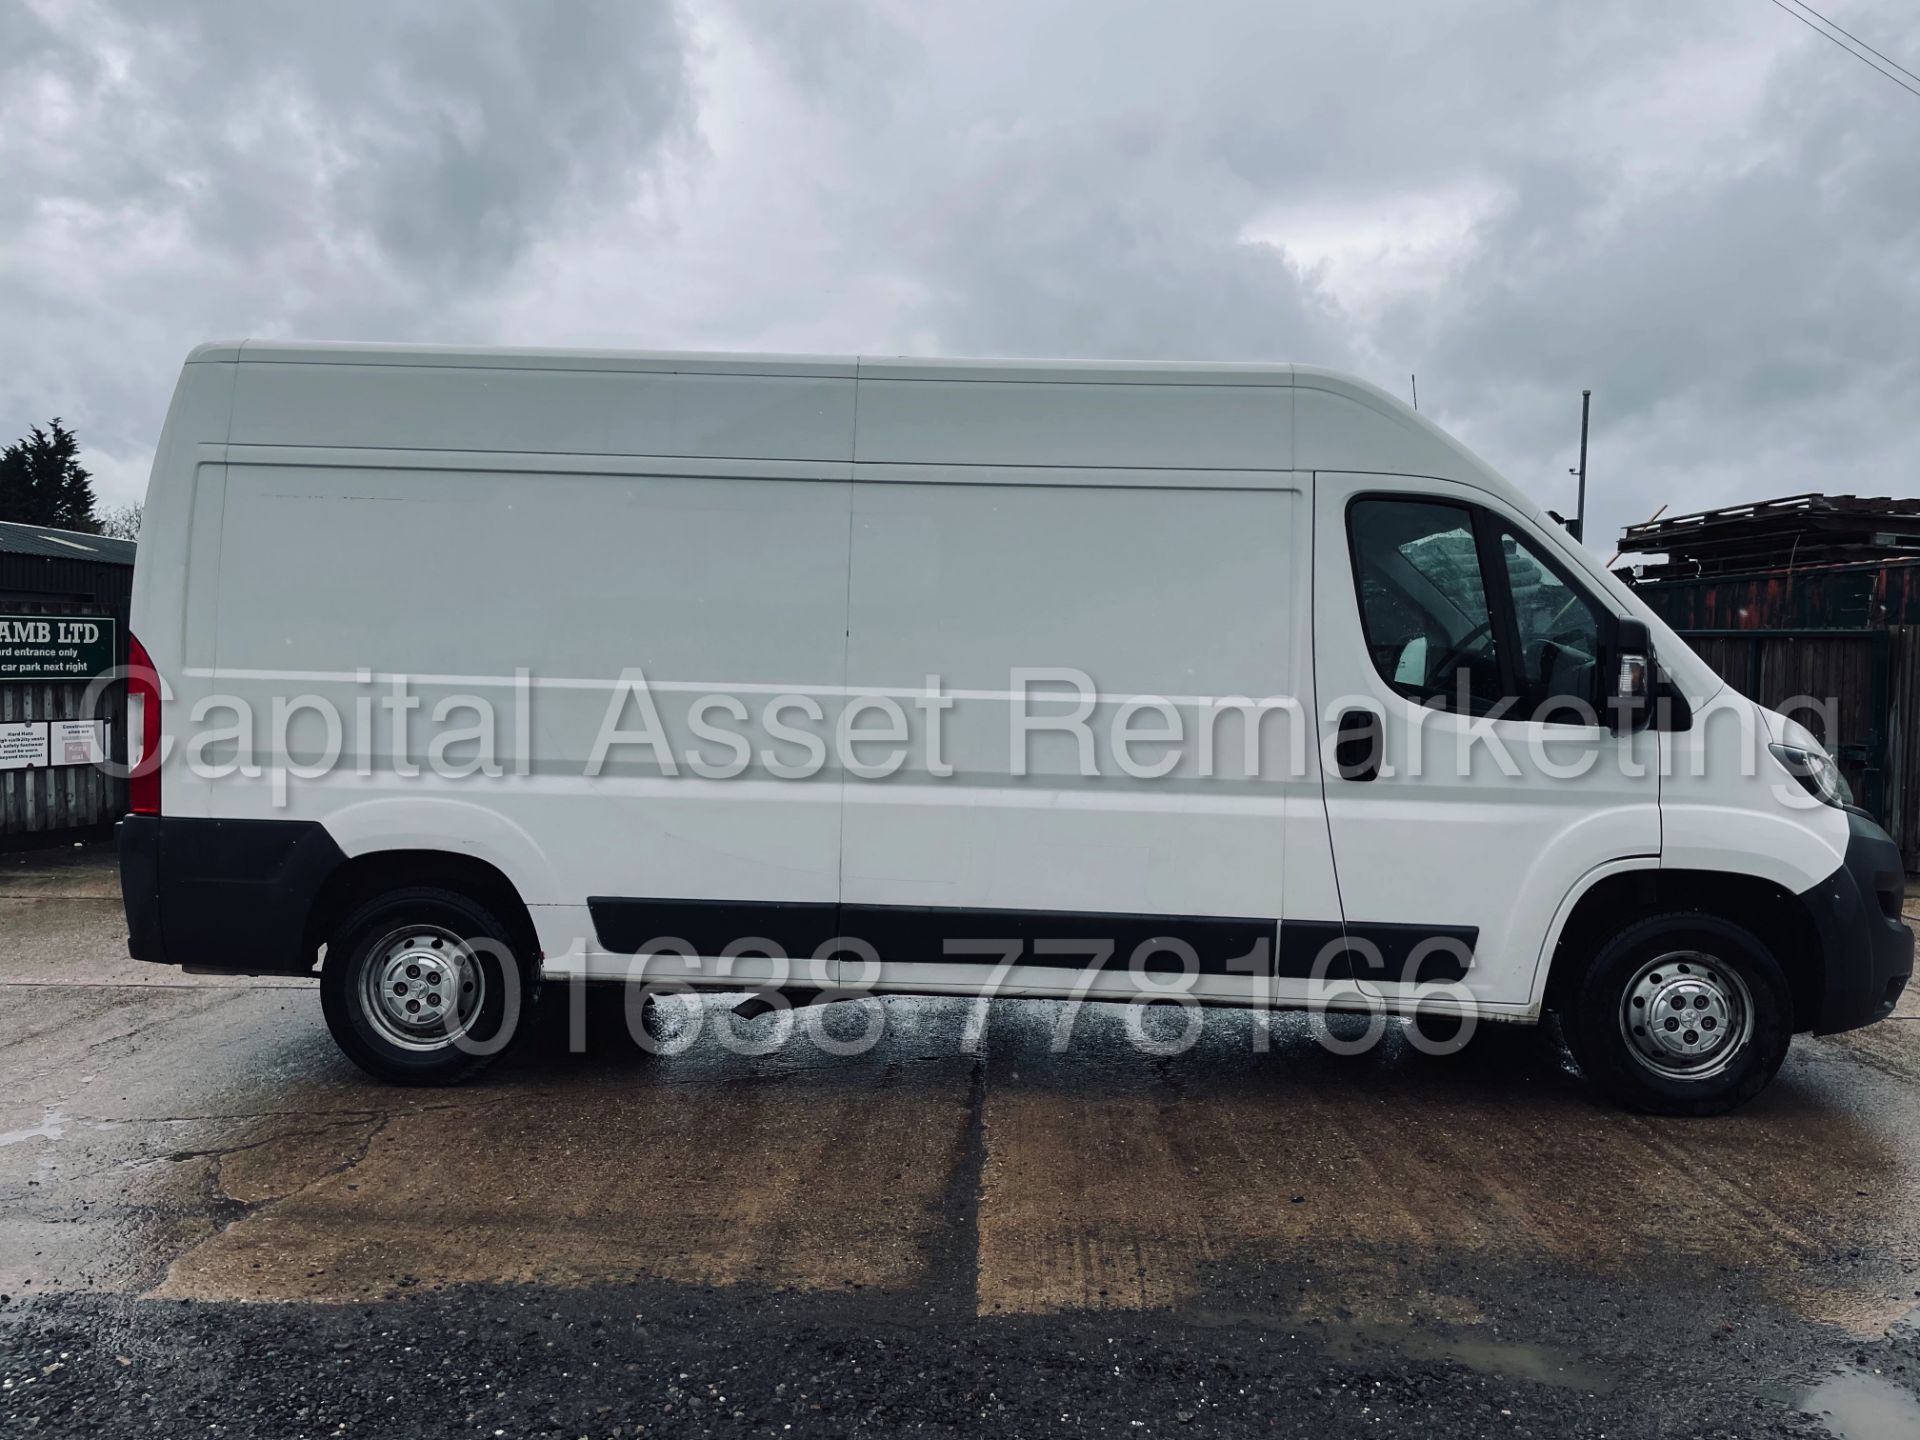 (On Sale) PEUGEOT BOXER 335 *PROFESSIONAL* LWB HI-ROOF (2016) '2.2 HDI - 6 SPEED' *A/C* (1 OWNER) - Image 14 of 41